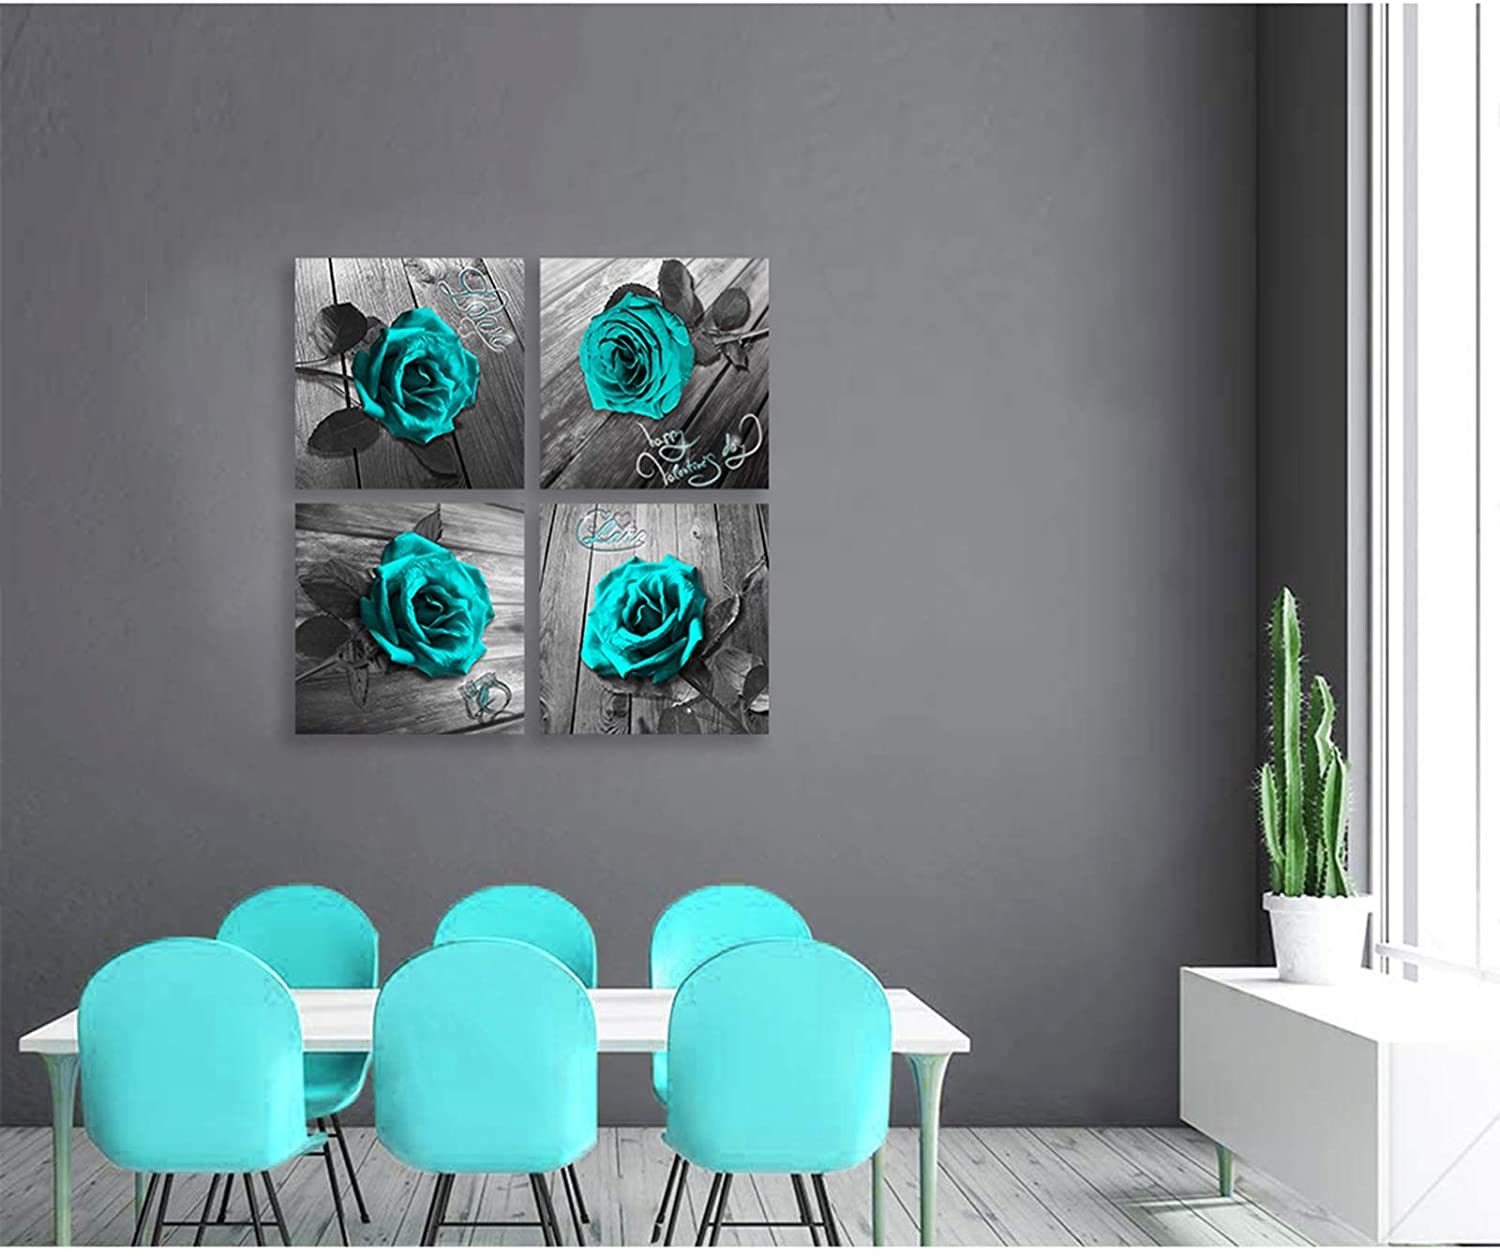 Canvas Wall Art Teal Blue Rose Canvas Prints Black and White Turquoise Floral Artwork Modern Frame Flower Pictures Canvas Art Wall Decor for Bedroom Living Room